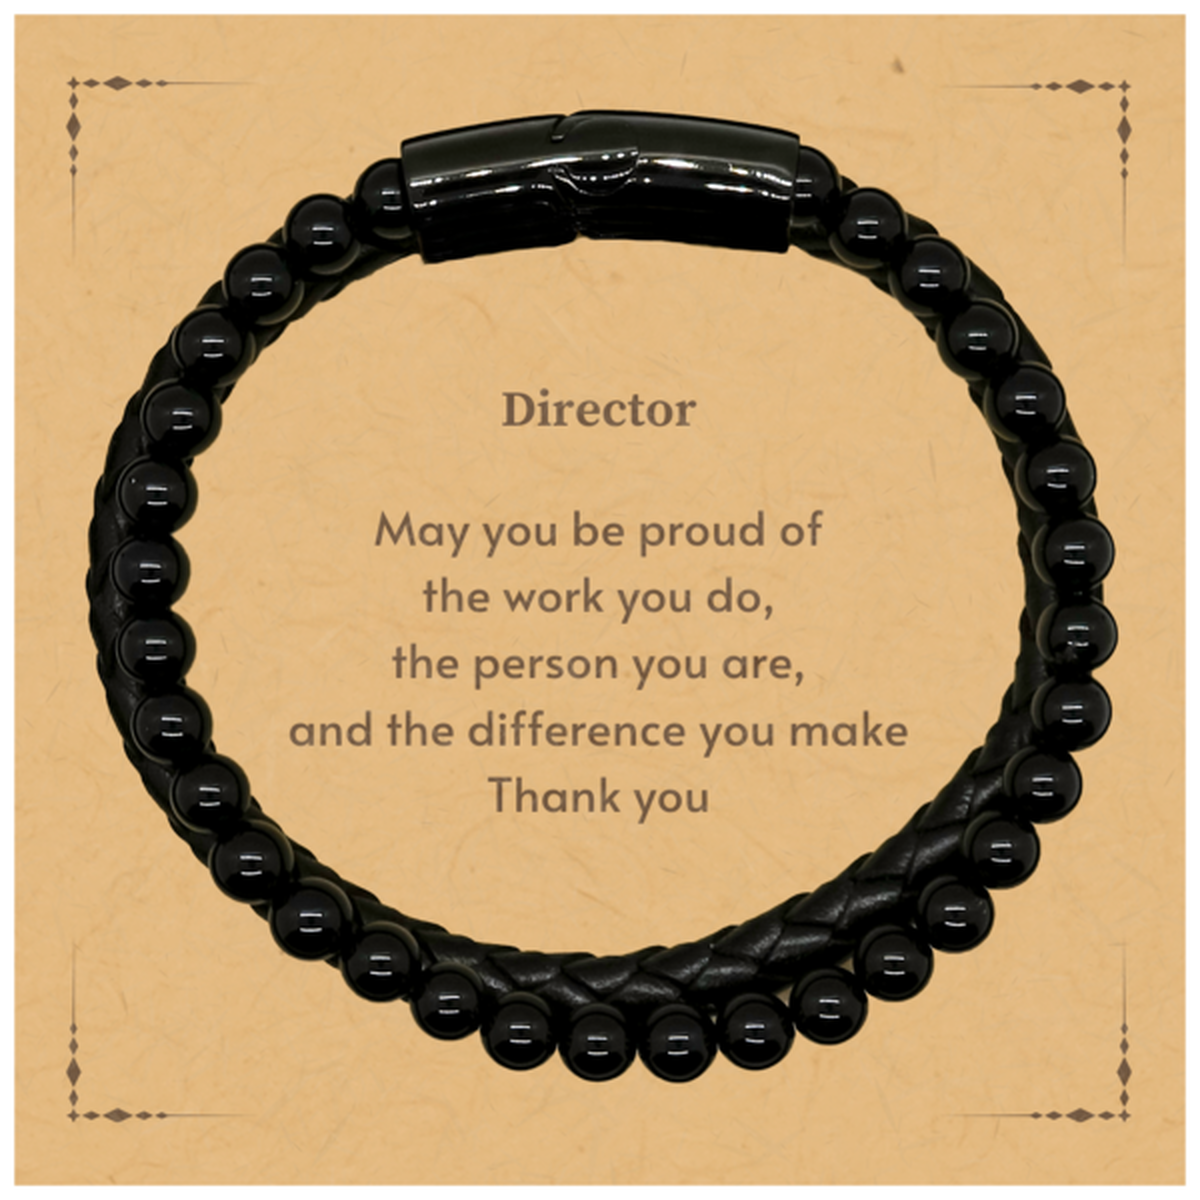 Heartwarming Stone Leather Bracelets Retirement Coworkers Gifts for Director, Director May You be proud of the work you do, the person you are Gifts for Boss Men Women Friends